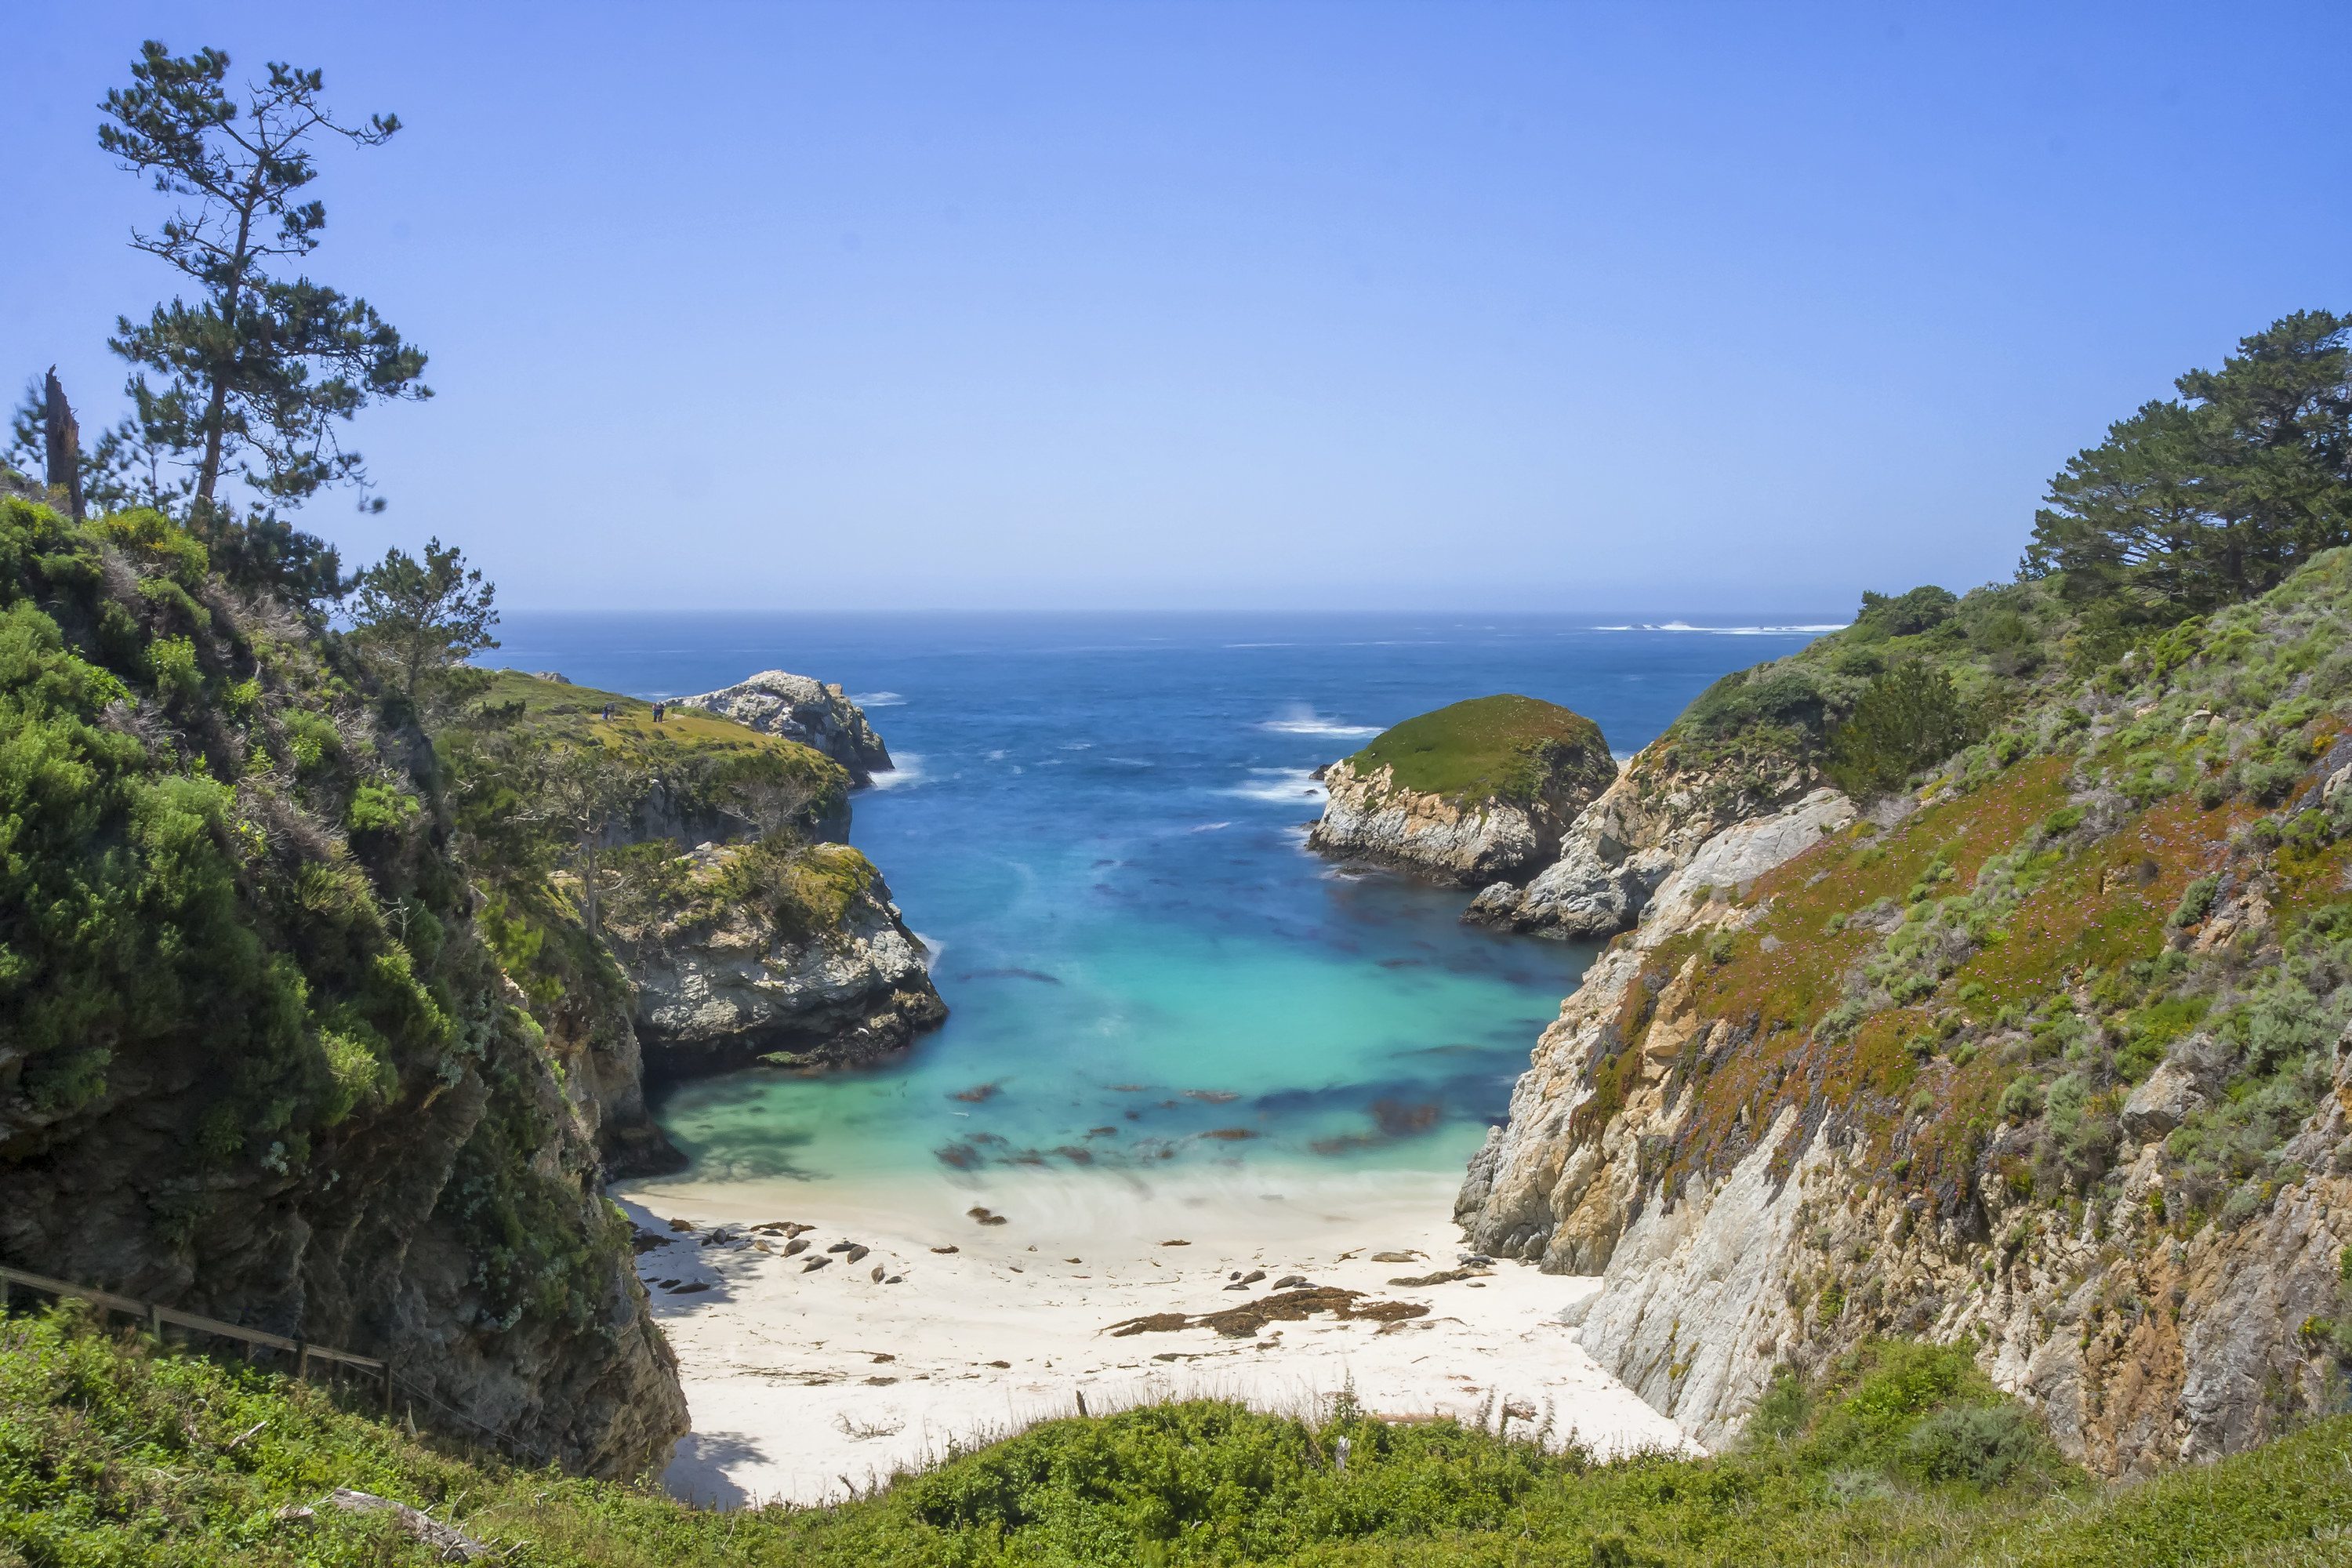 China Cove in Carmel-by-the-Sea